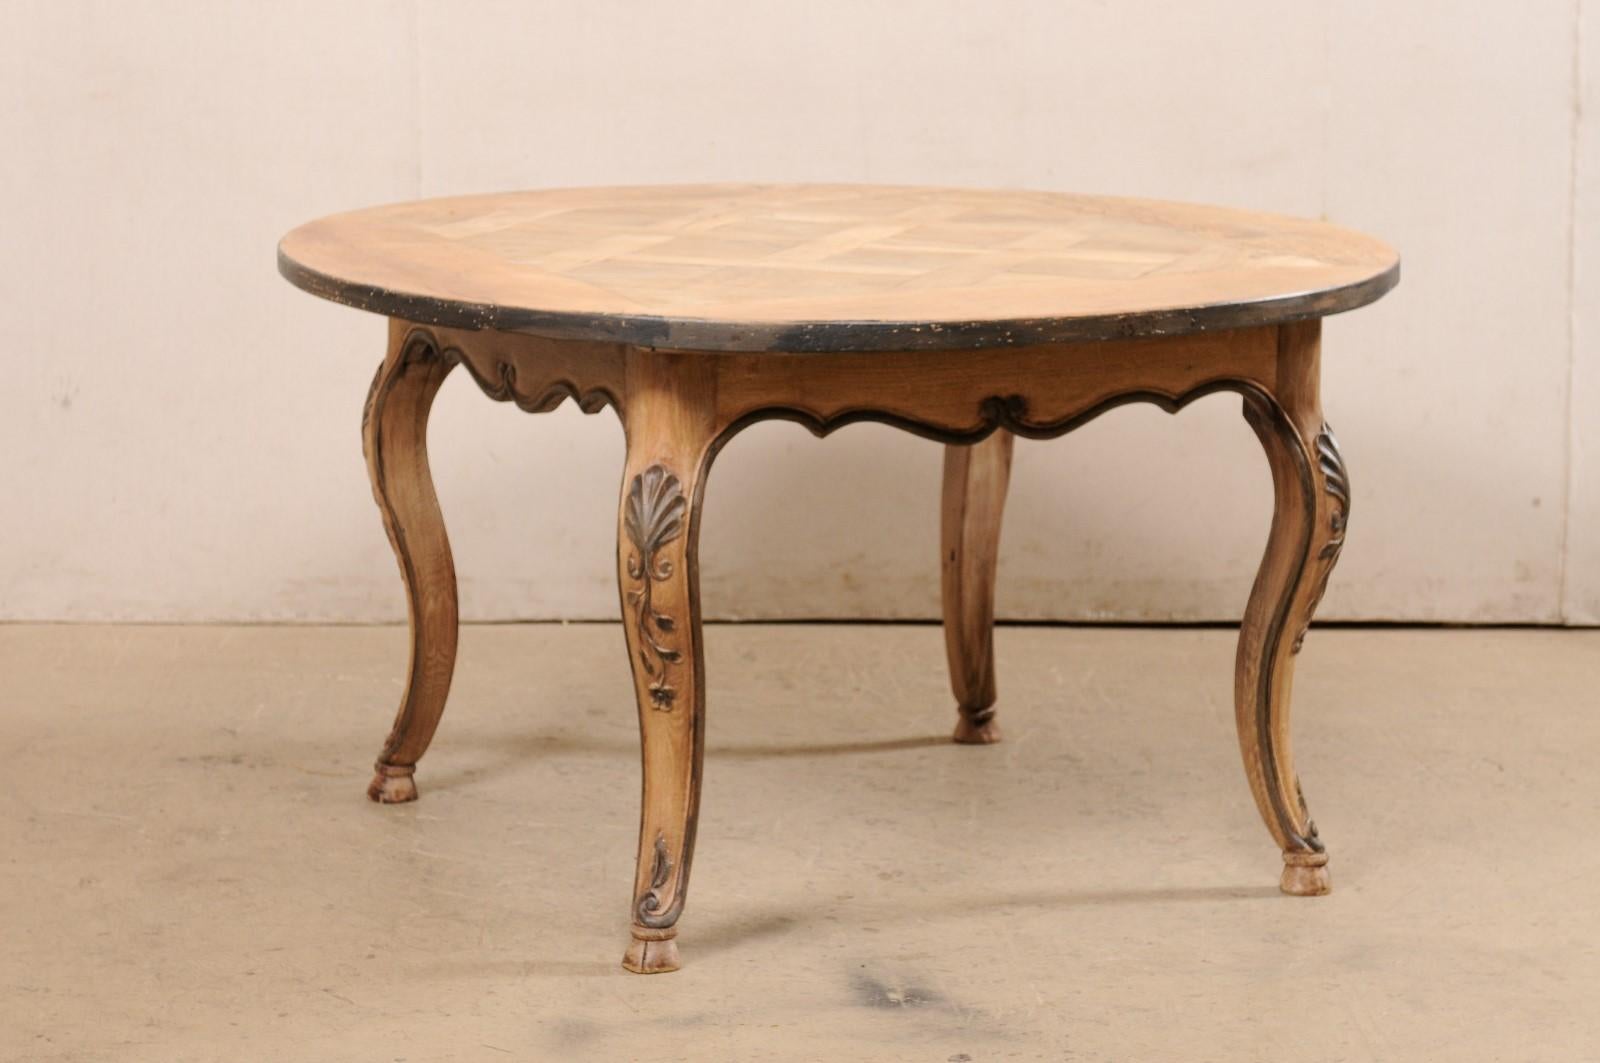 A French carved wood and round-shaped table from the 19th century. This antique table from France features a round shaped top (approximately 4.6 feet across in diameter) that has a lovely inlayed lattice inspired squared center, and overhangs the